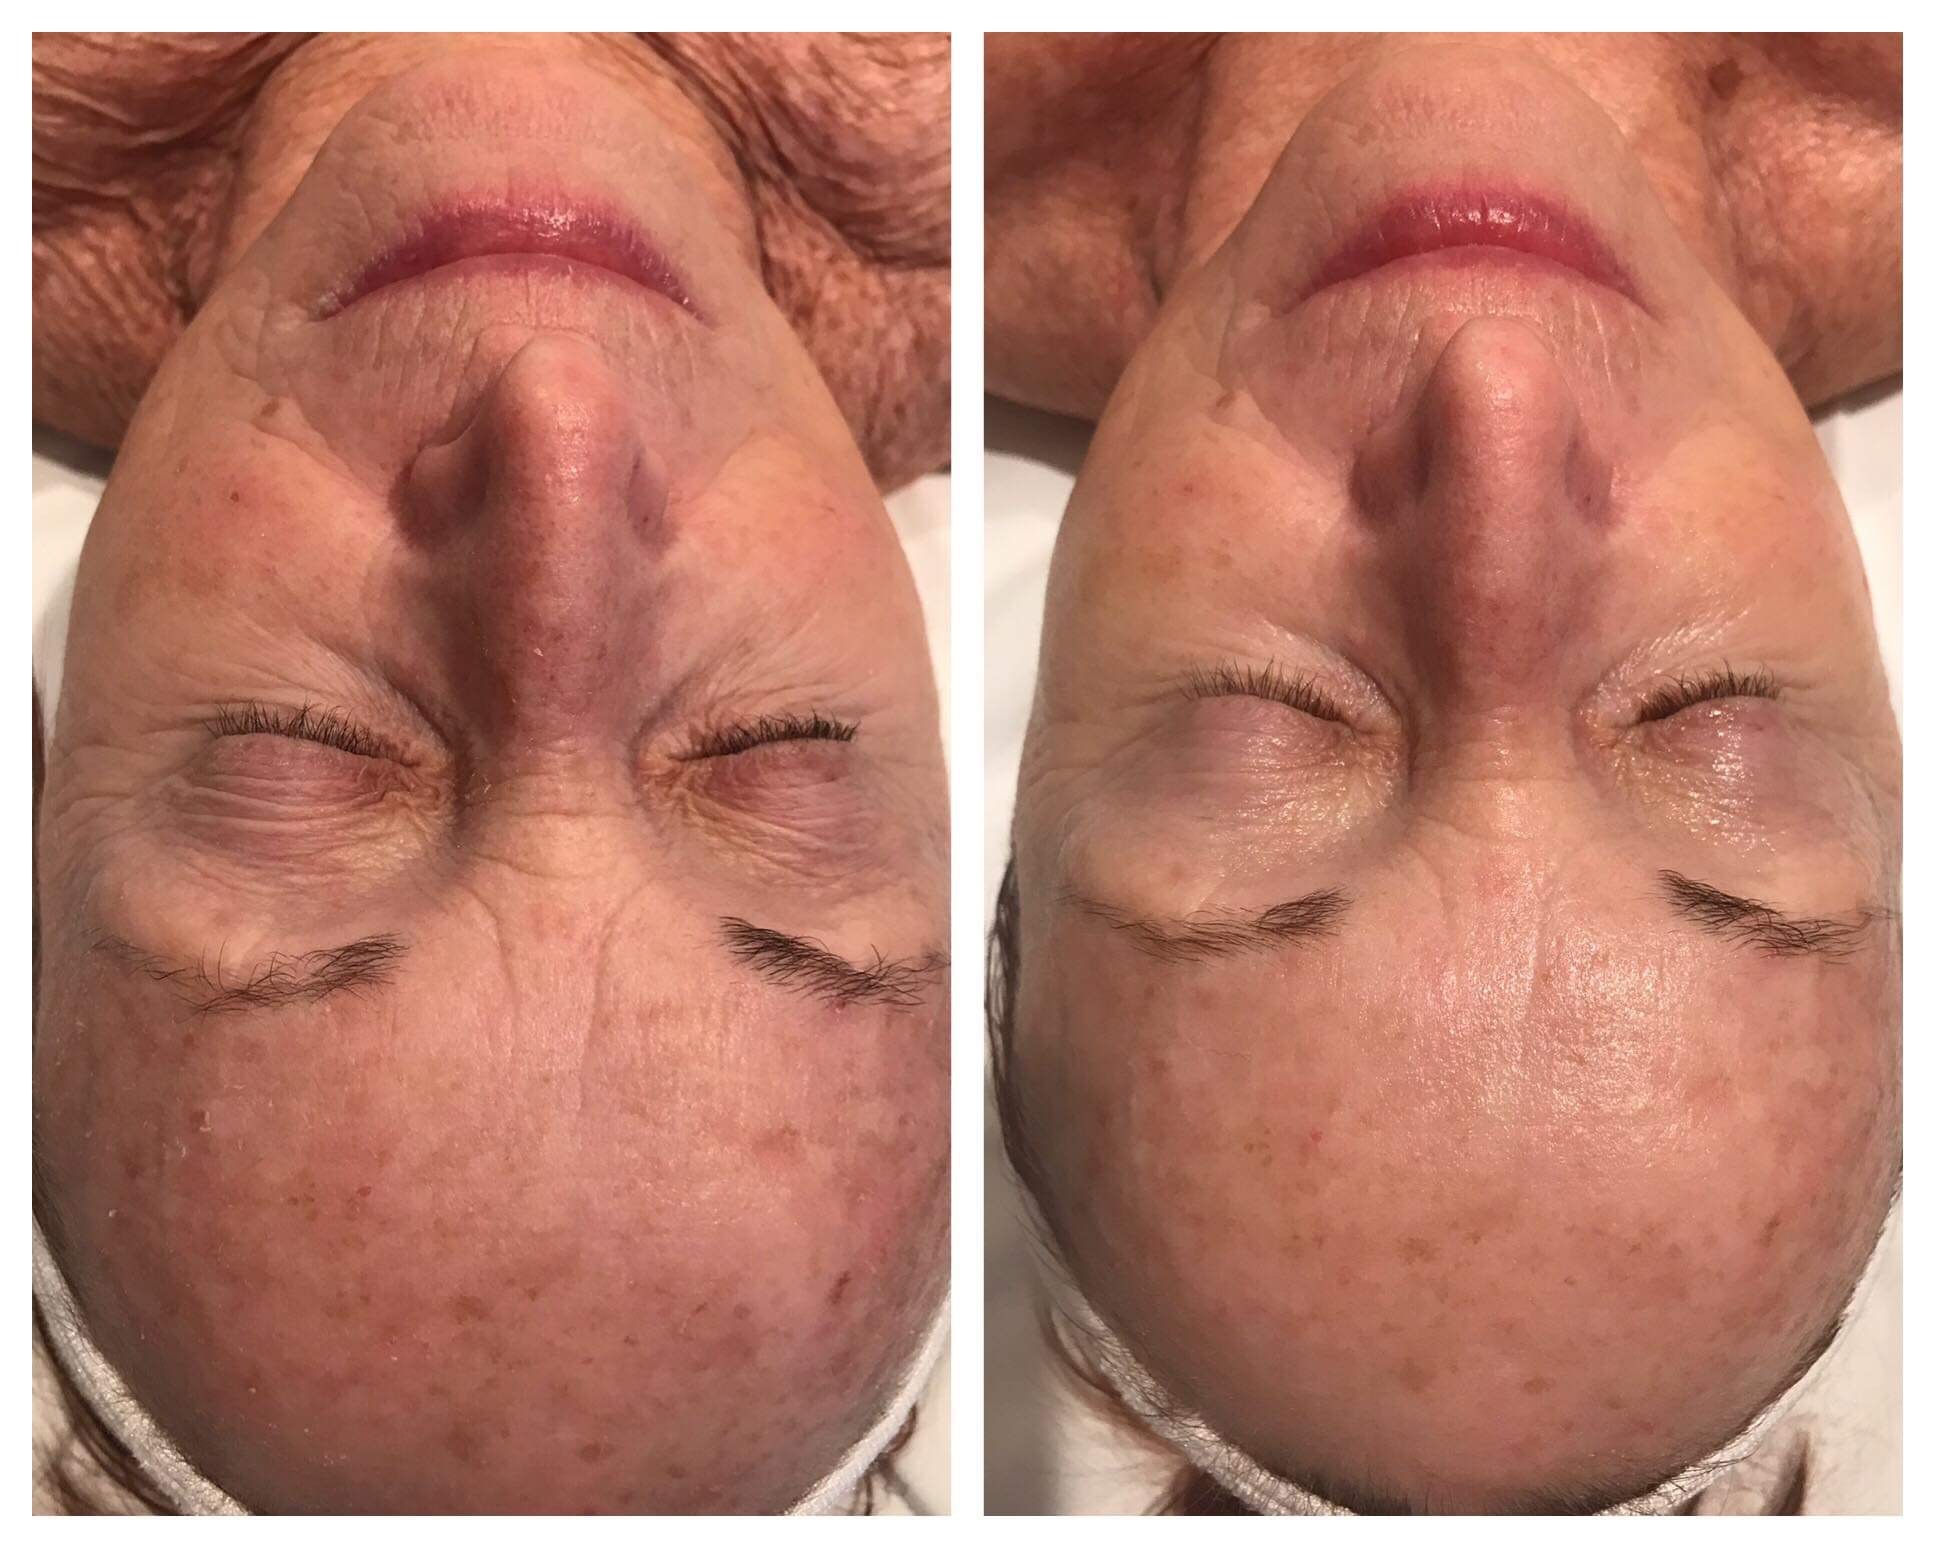 Before and After Nano Needling. Skin improvement.